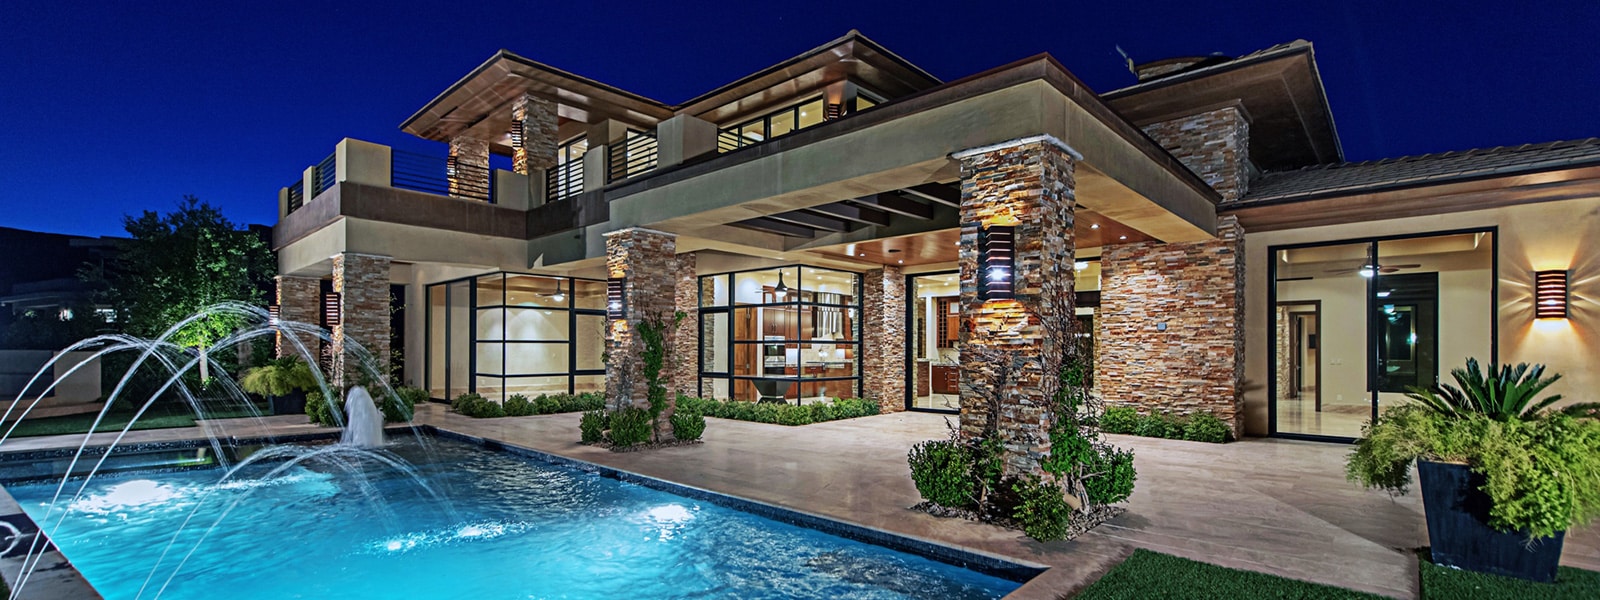 Idaho Luxury Home Accel Collection with pool